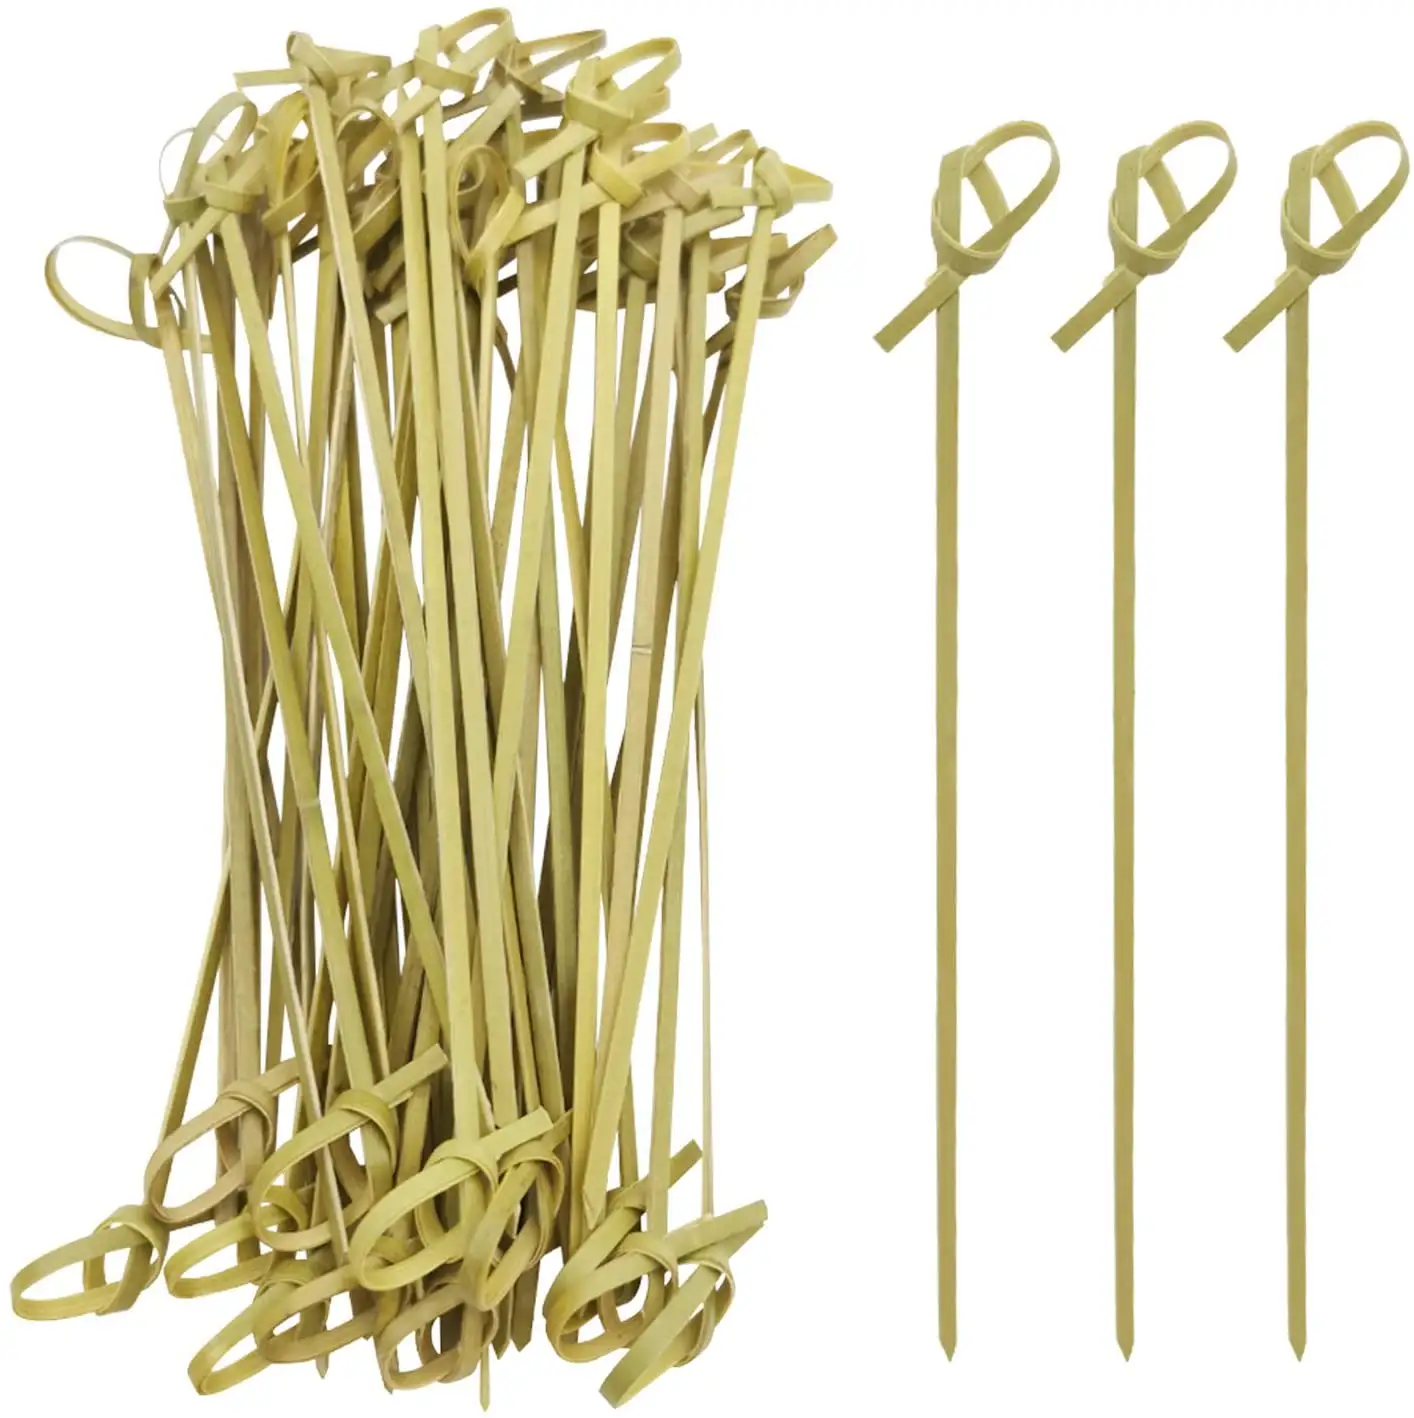 Party Toothpicks 100 PCS Wooden Bamboo Cocktail Picks with Looped Knot for Appetizers Cocktail Drinks